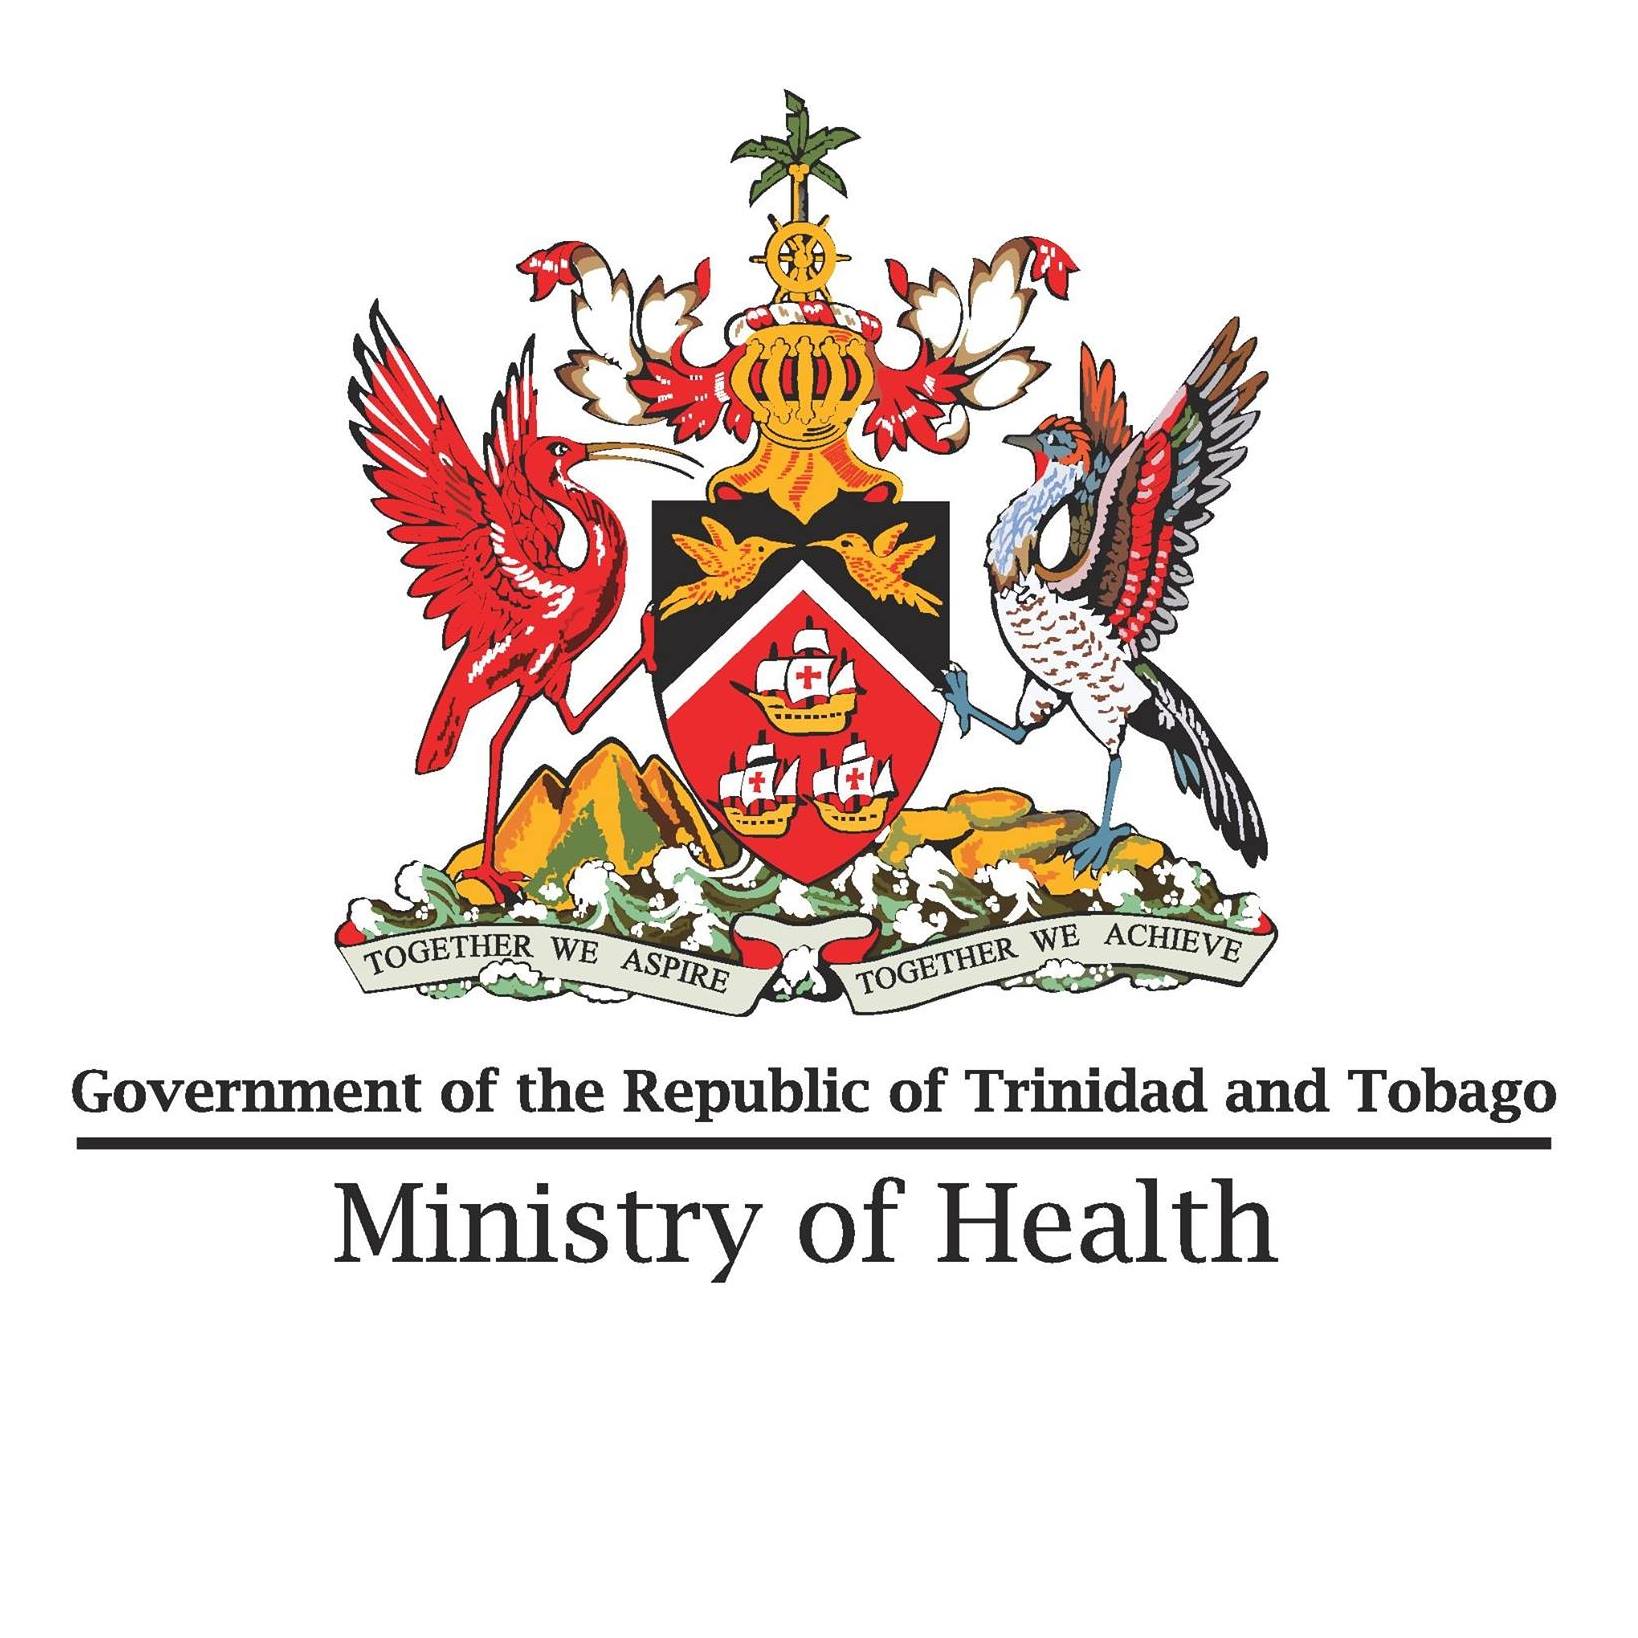 Ministry of Health Jobs July 2023, MOH Vacancies August 2021, Ministry of Health Vacancy March 2021, Ministry of Health Vacancy November 2020, Ministry of Health Vacancies Sept. 2020